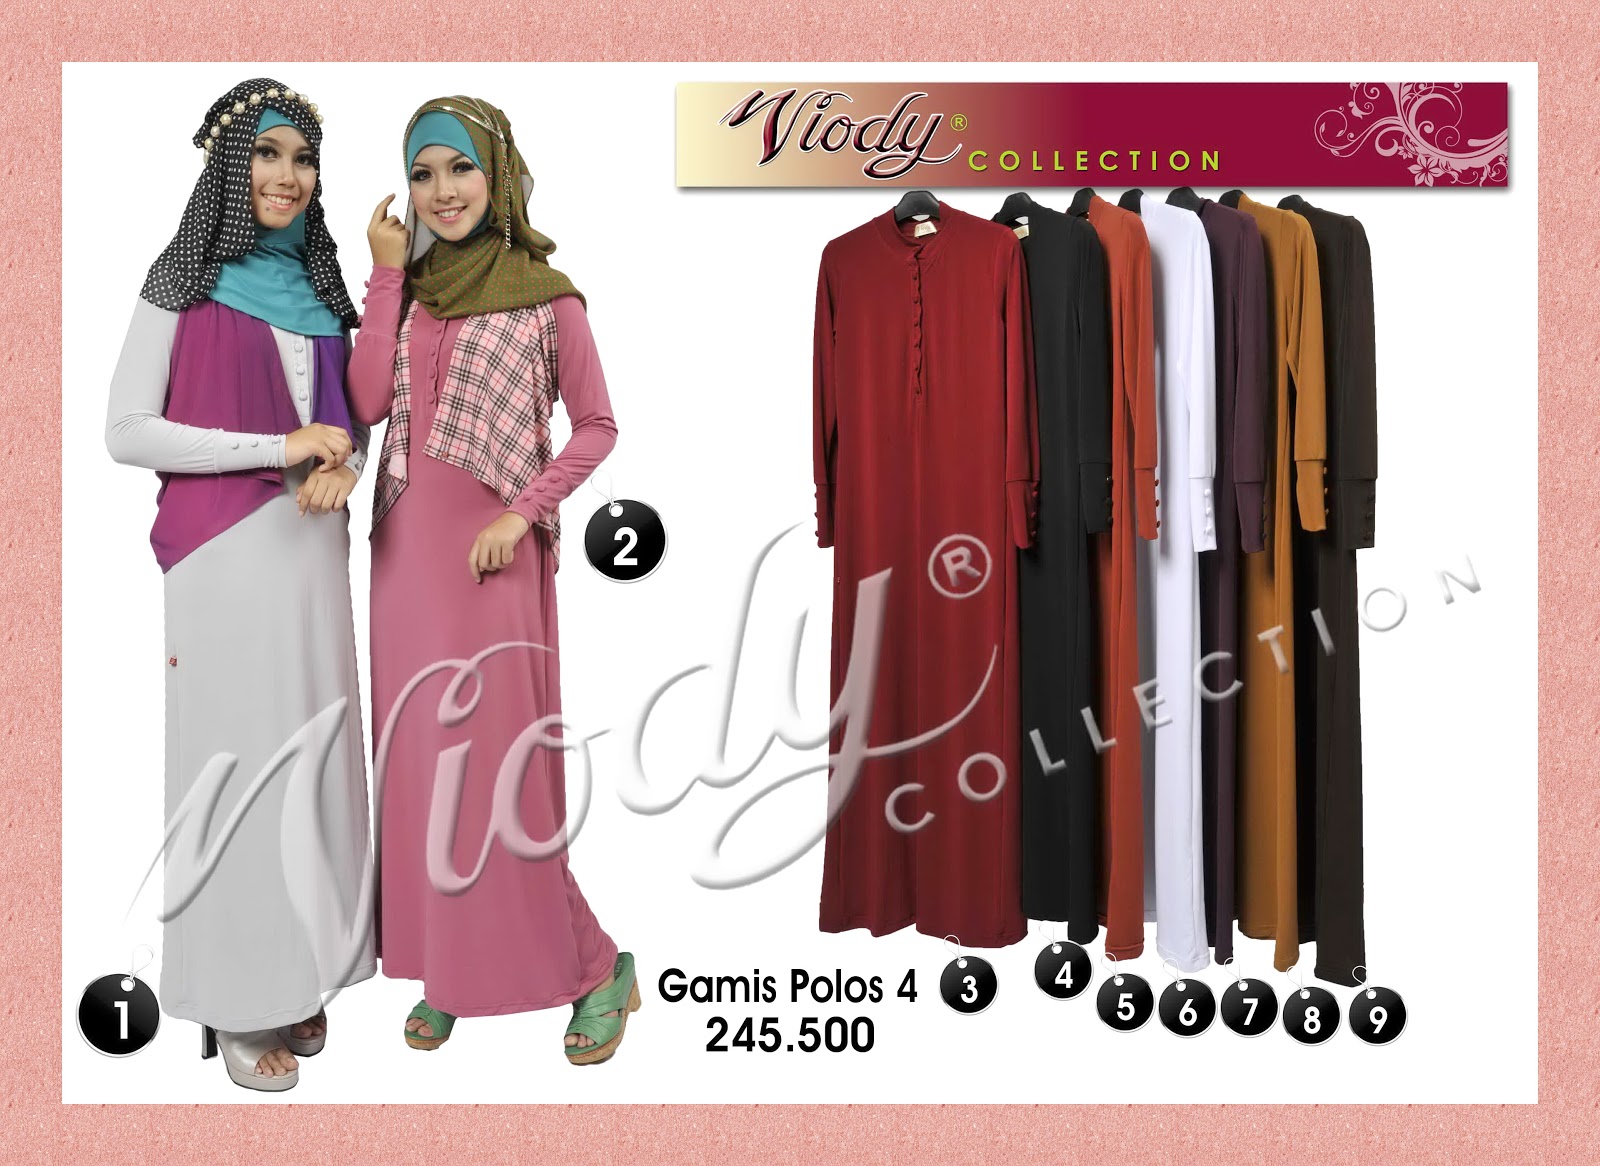 VioDyCoLLeCTioN Gamis Gamis Polos VioDy CoLLeCTioN